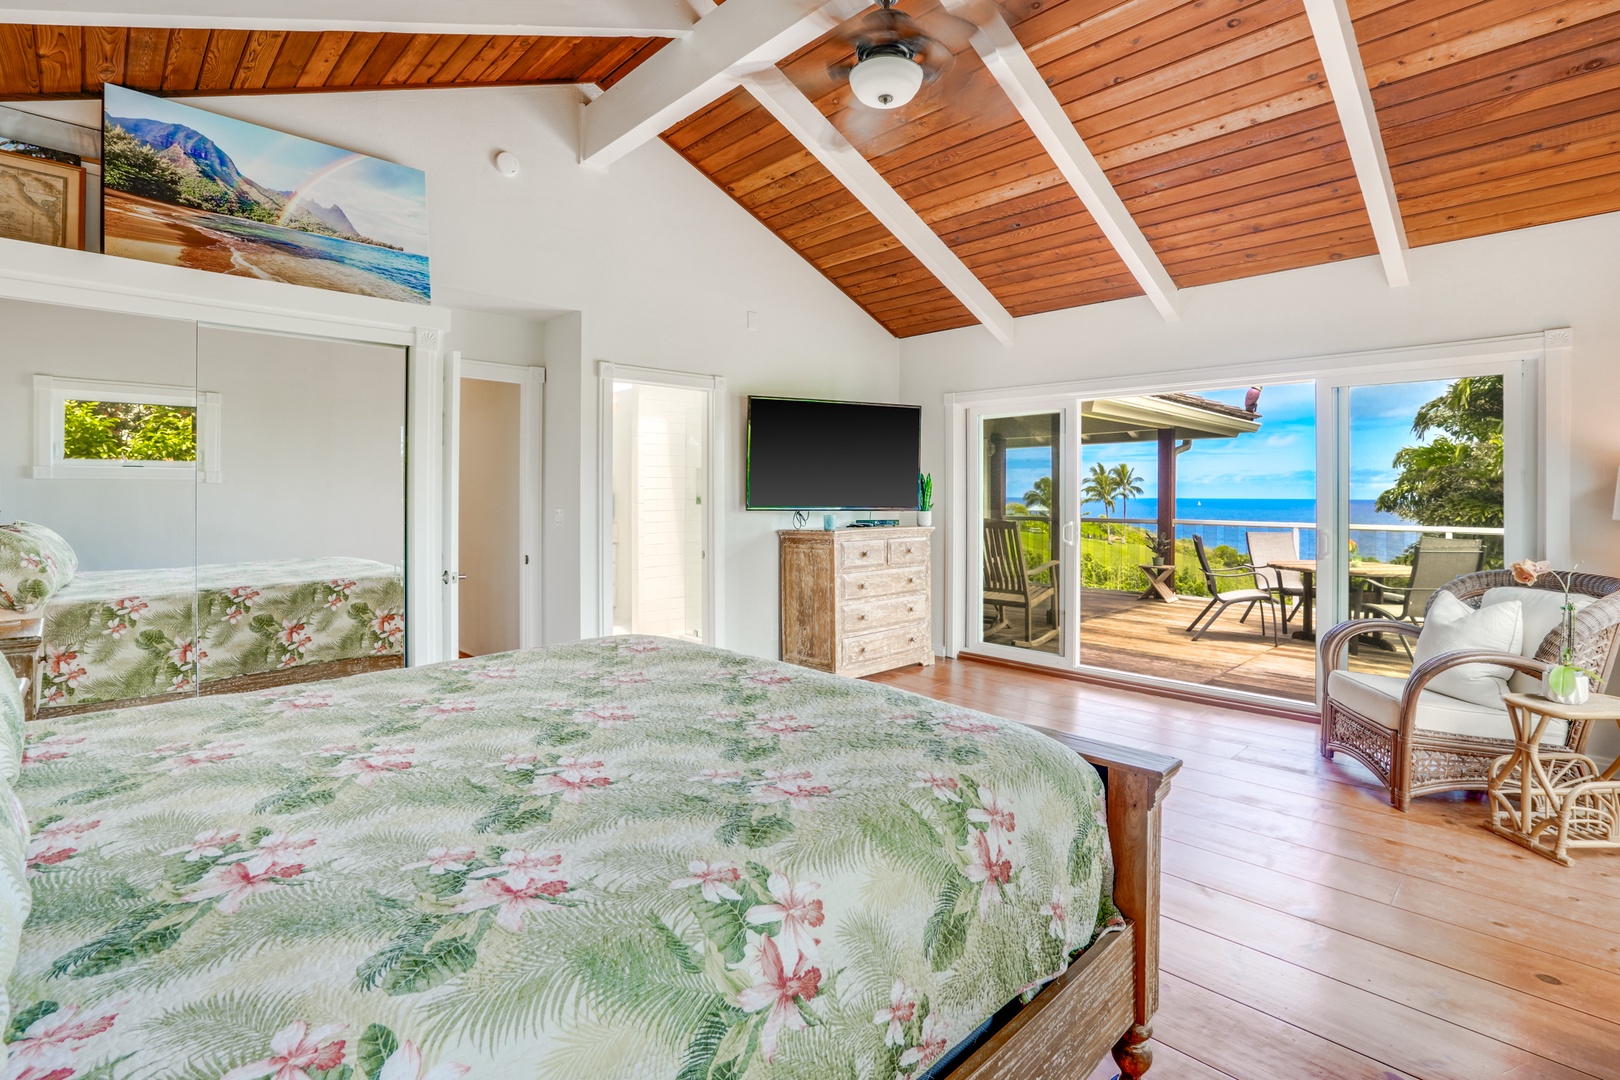 Princeville Vacation Rentals, Wai Lani - Spacious primary with wide sliding doors to private lanai with captivating panoramic ocean views.